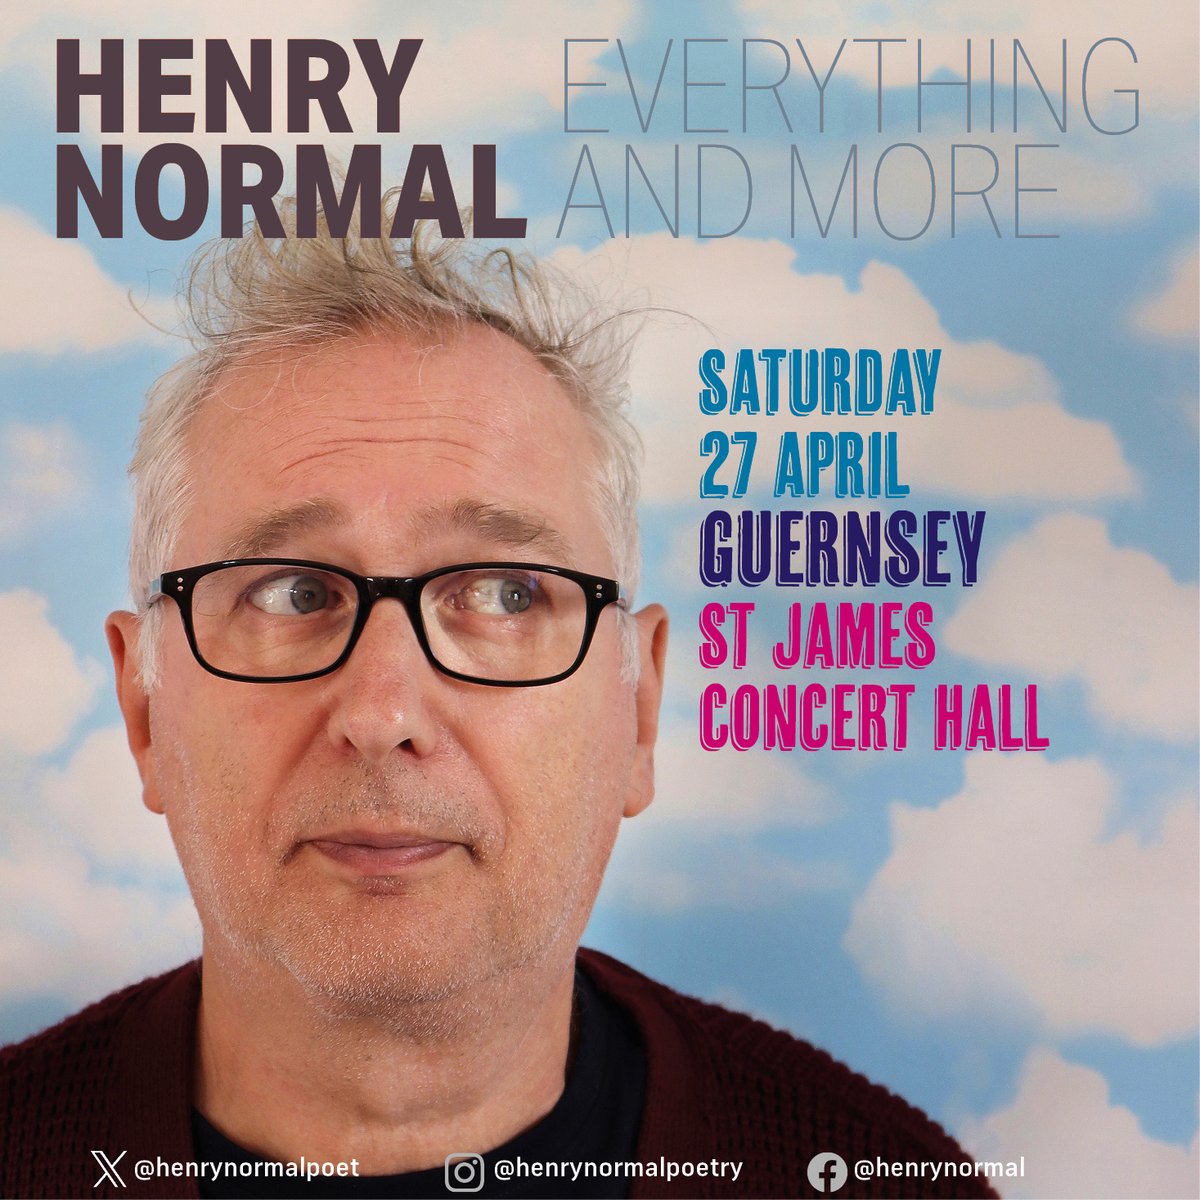 I'm told Guernsey has 63,463 inhabitants but the St James Concert Hall can't fit everyone in so I'd recommend getting your ticket asap. This is going to be fantastic.a lot of fun.